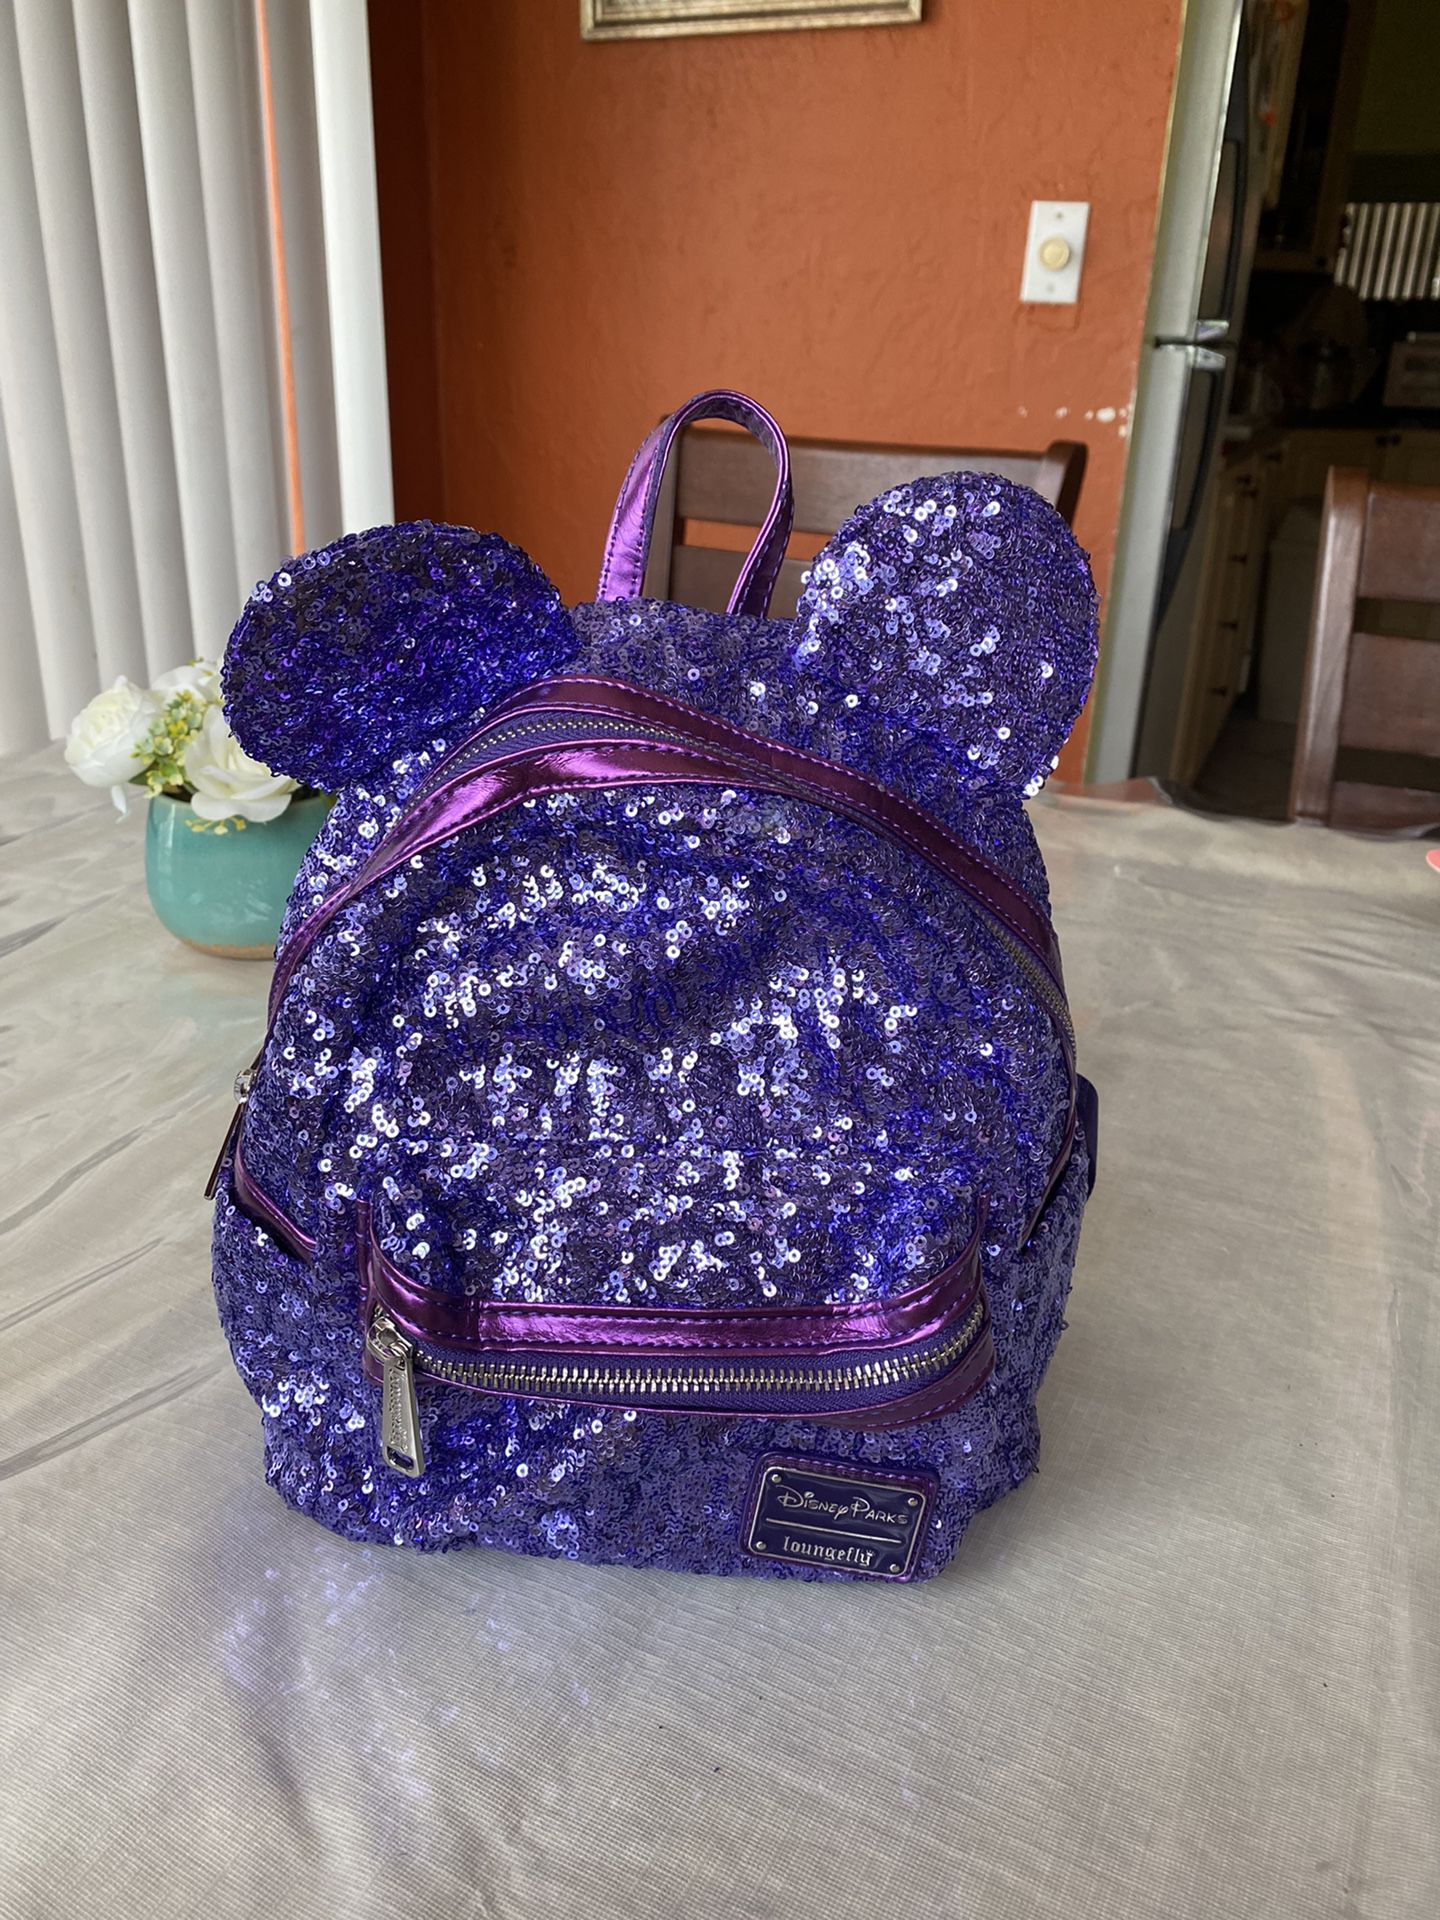 Disney Parks Loungefly Purple Potion Sequined Mini Backpack Mouse Ears CZ.   Used but very good condition 